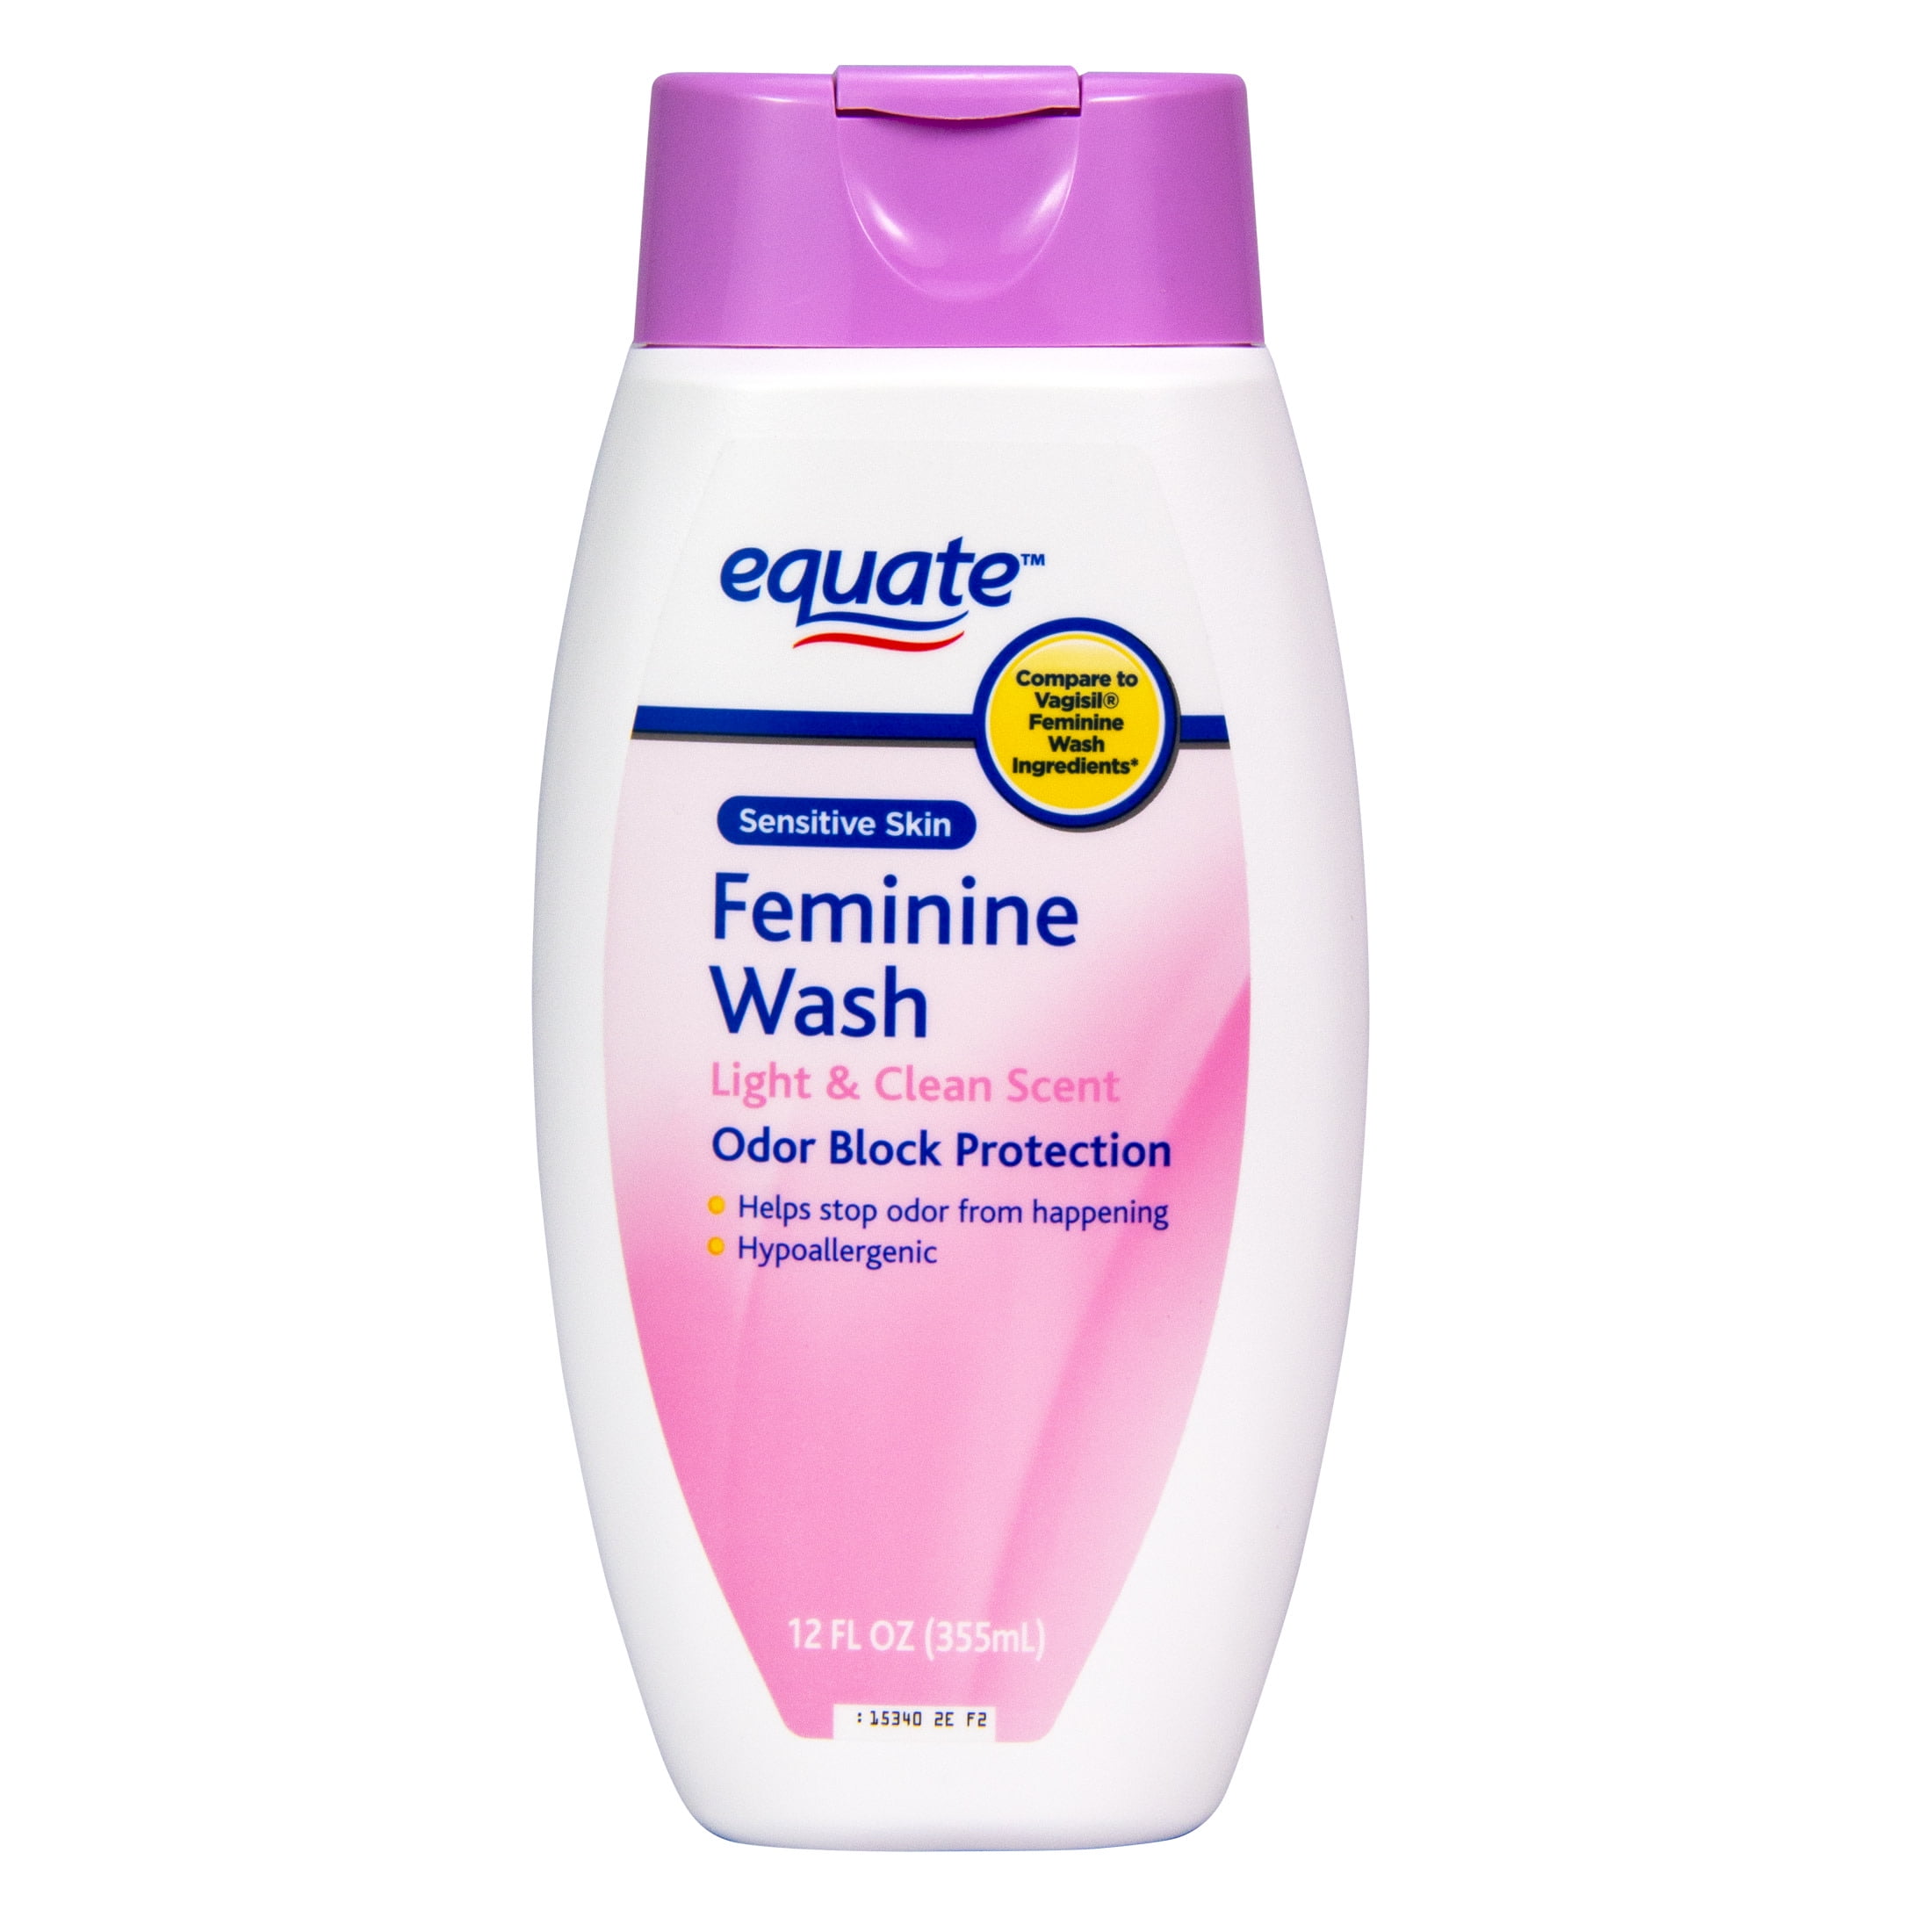 Equate Feminine Wash; Vaginal Cleanser Helps Stop Odor From Happening, 12.0 Ounce